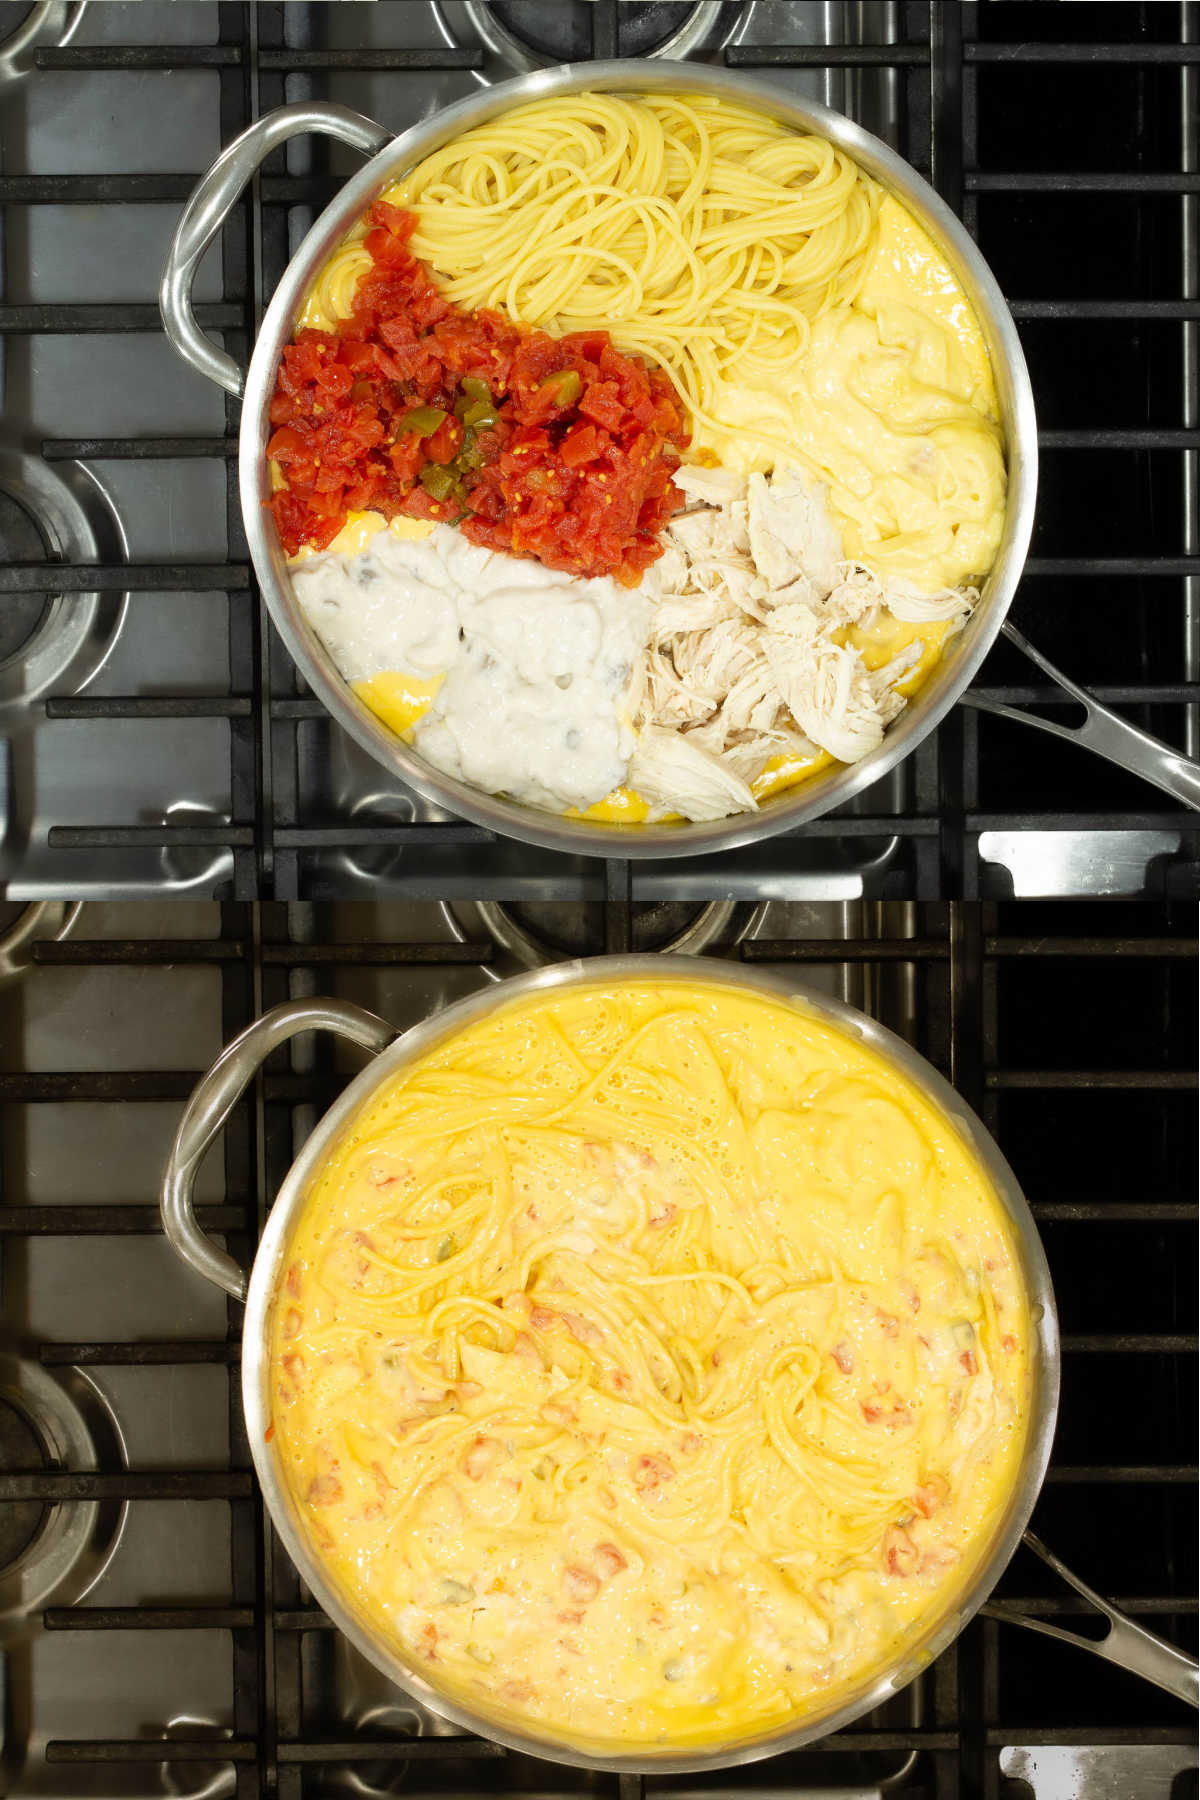 Collage of the mixed chicken spaghetti ingredients in a pan.